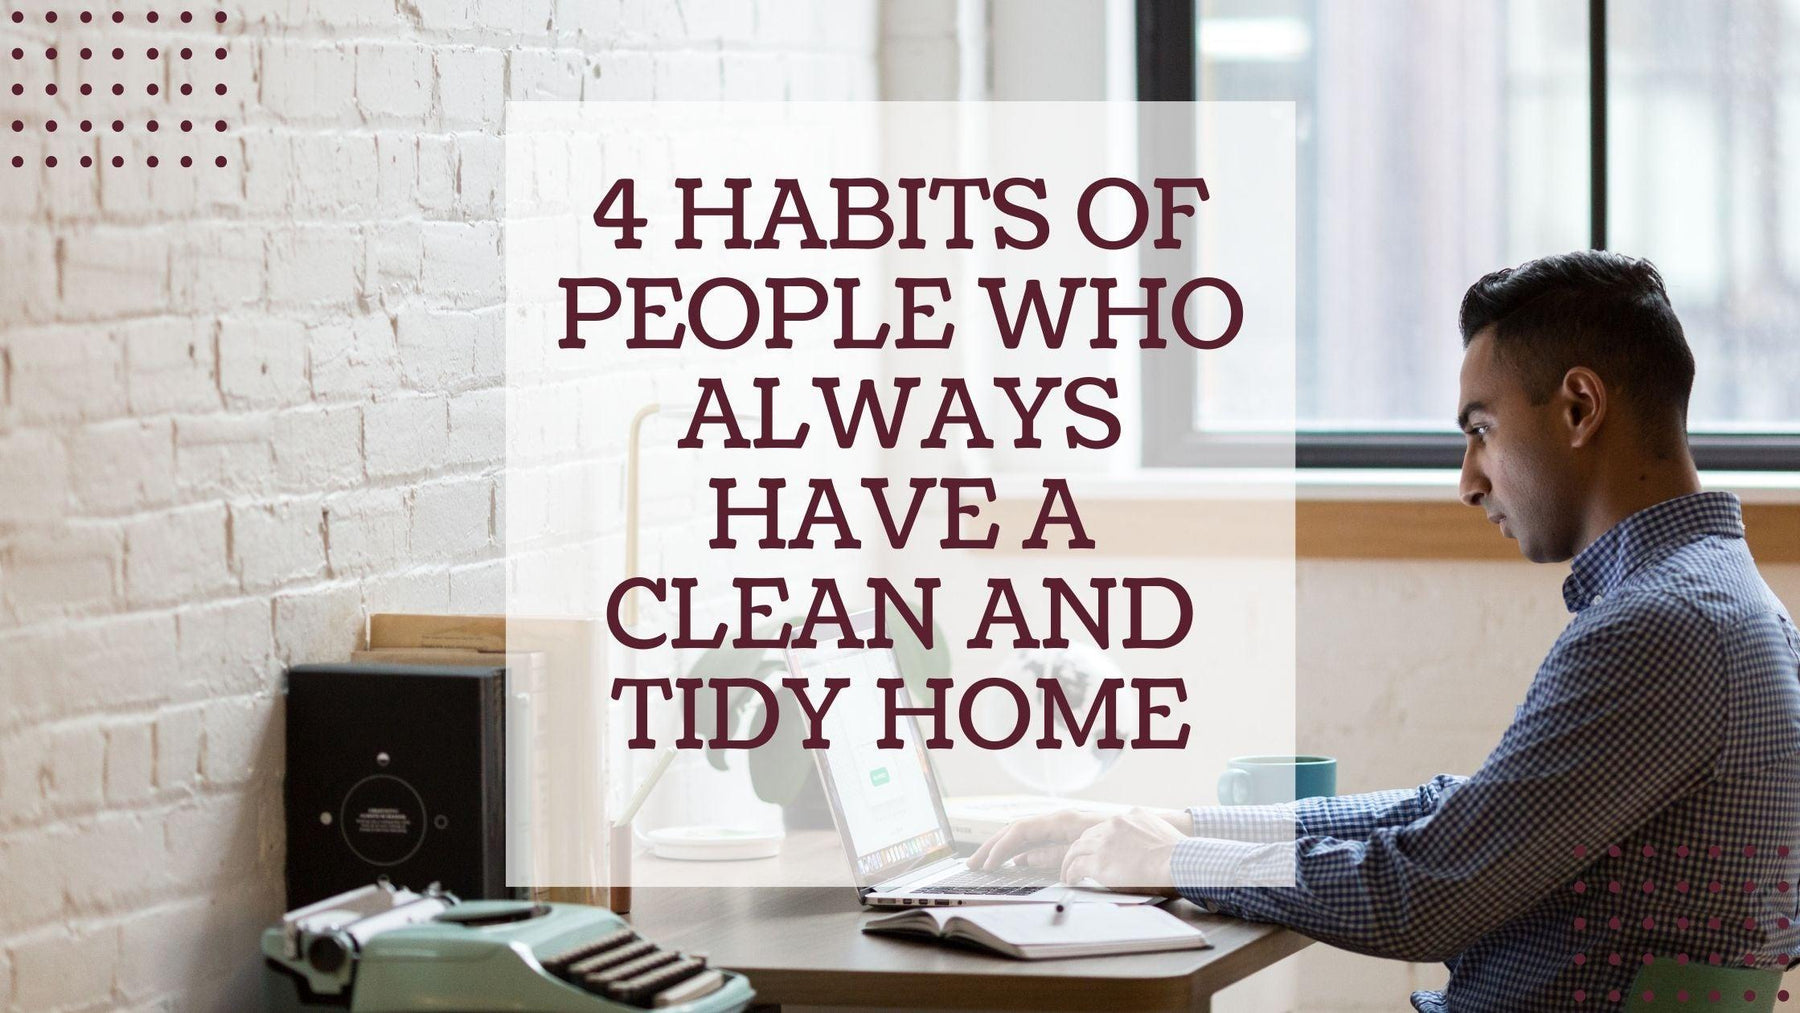 4 Habits of People Who Always Have a Clean and Tidy Home - WoodenTwist